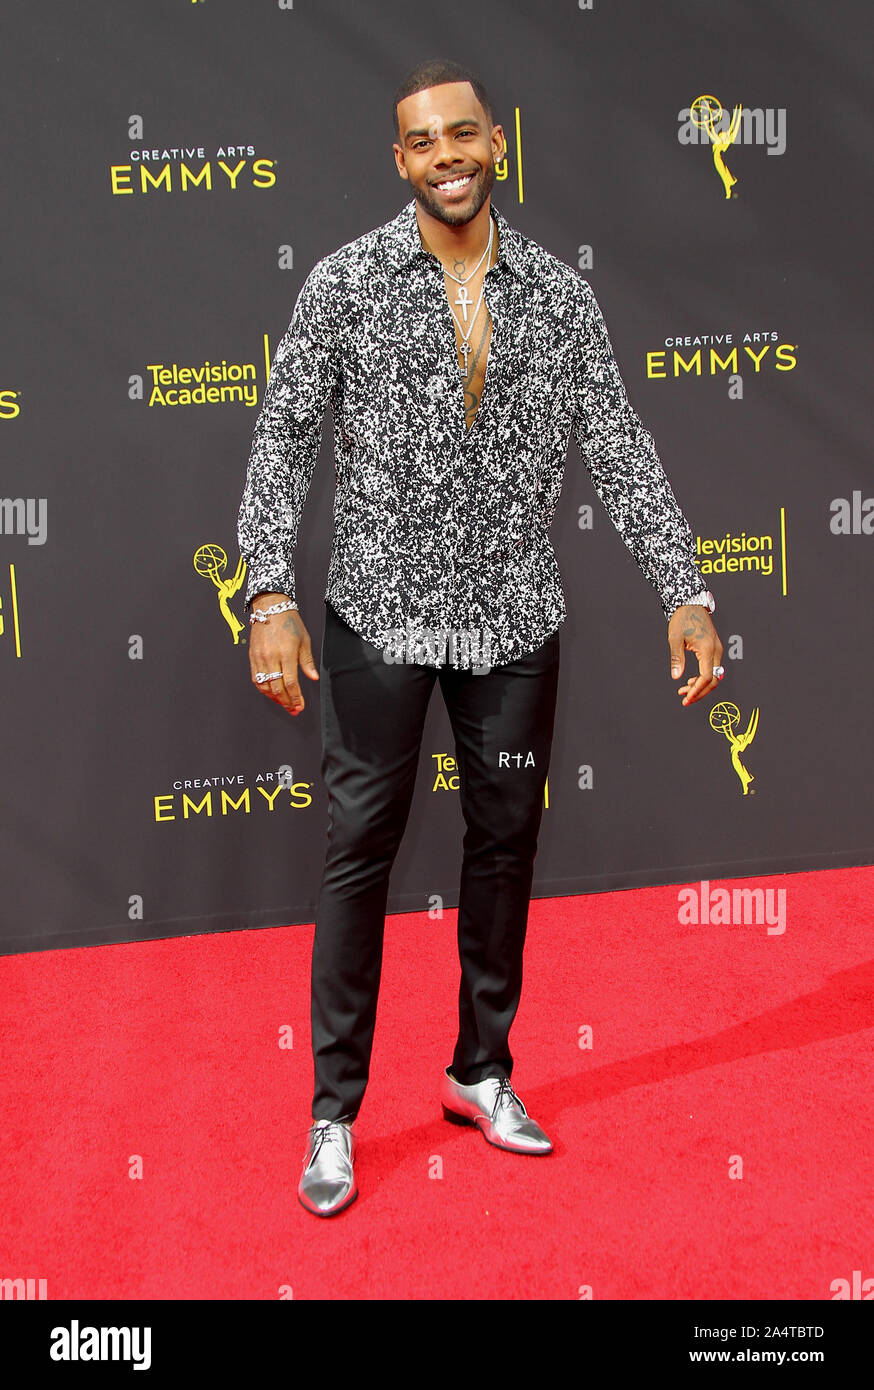 Creative Arts Emmy 2019 - Day 1 Arrivals held at the Microsoft Theatre in Los Angeles, California. Featuring: Mario Where: Los Angeles, California, United States When: 15 Sep 2019 Credit: Adriana M. Barraza/WENN.com Stock Photo